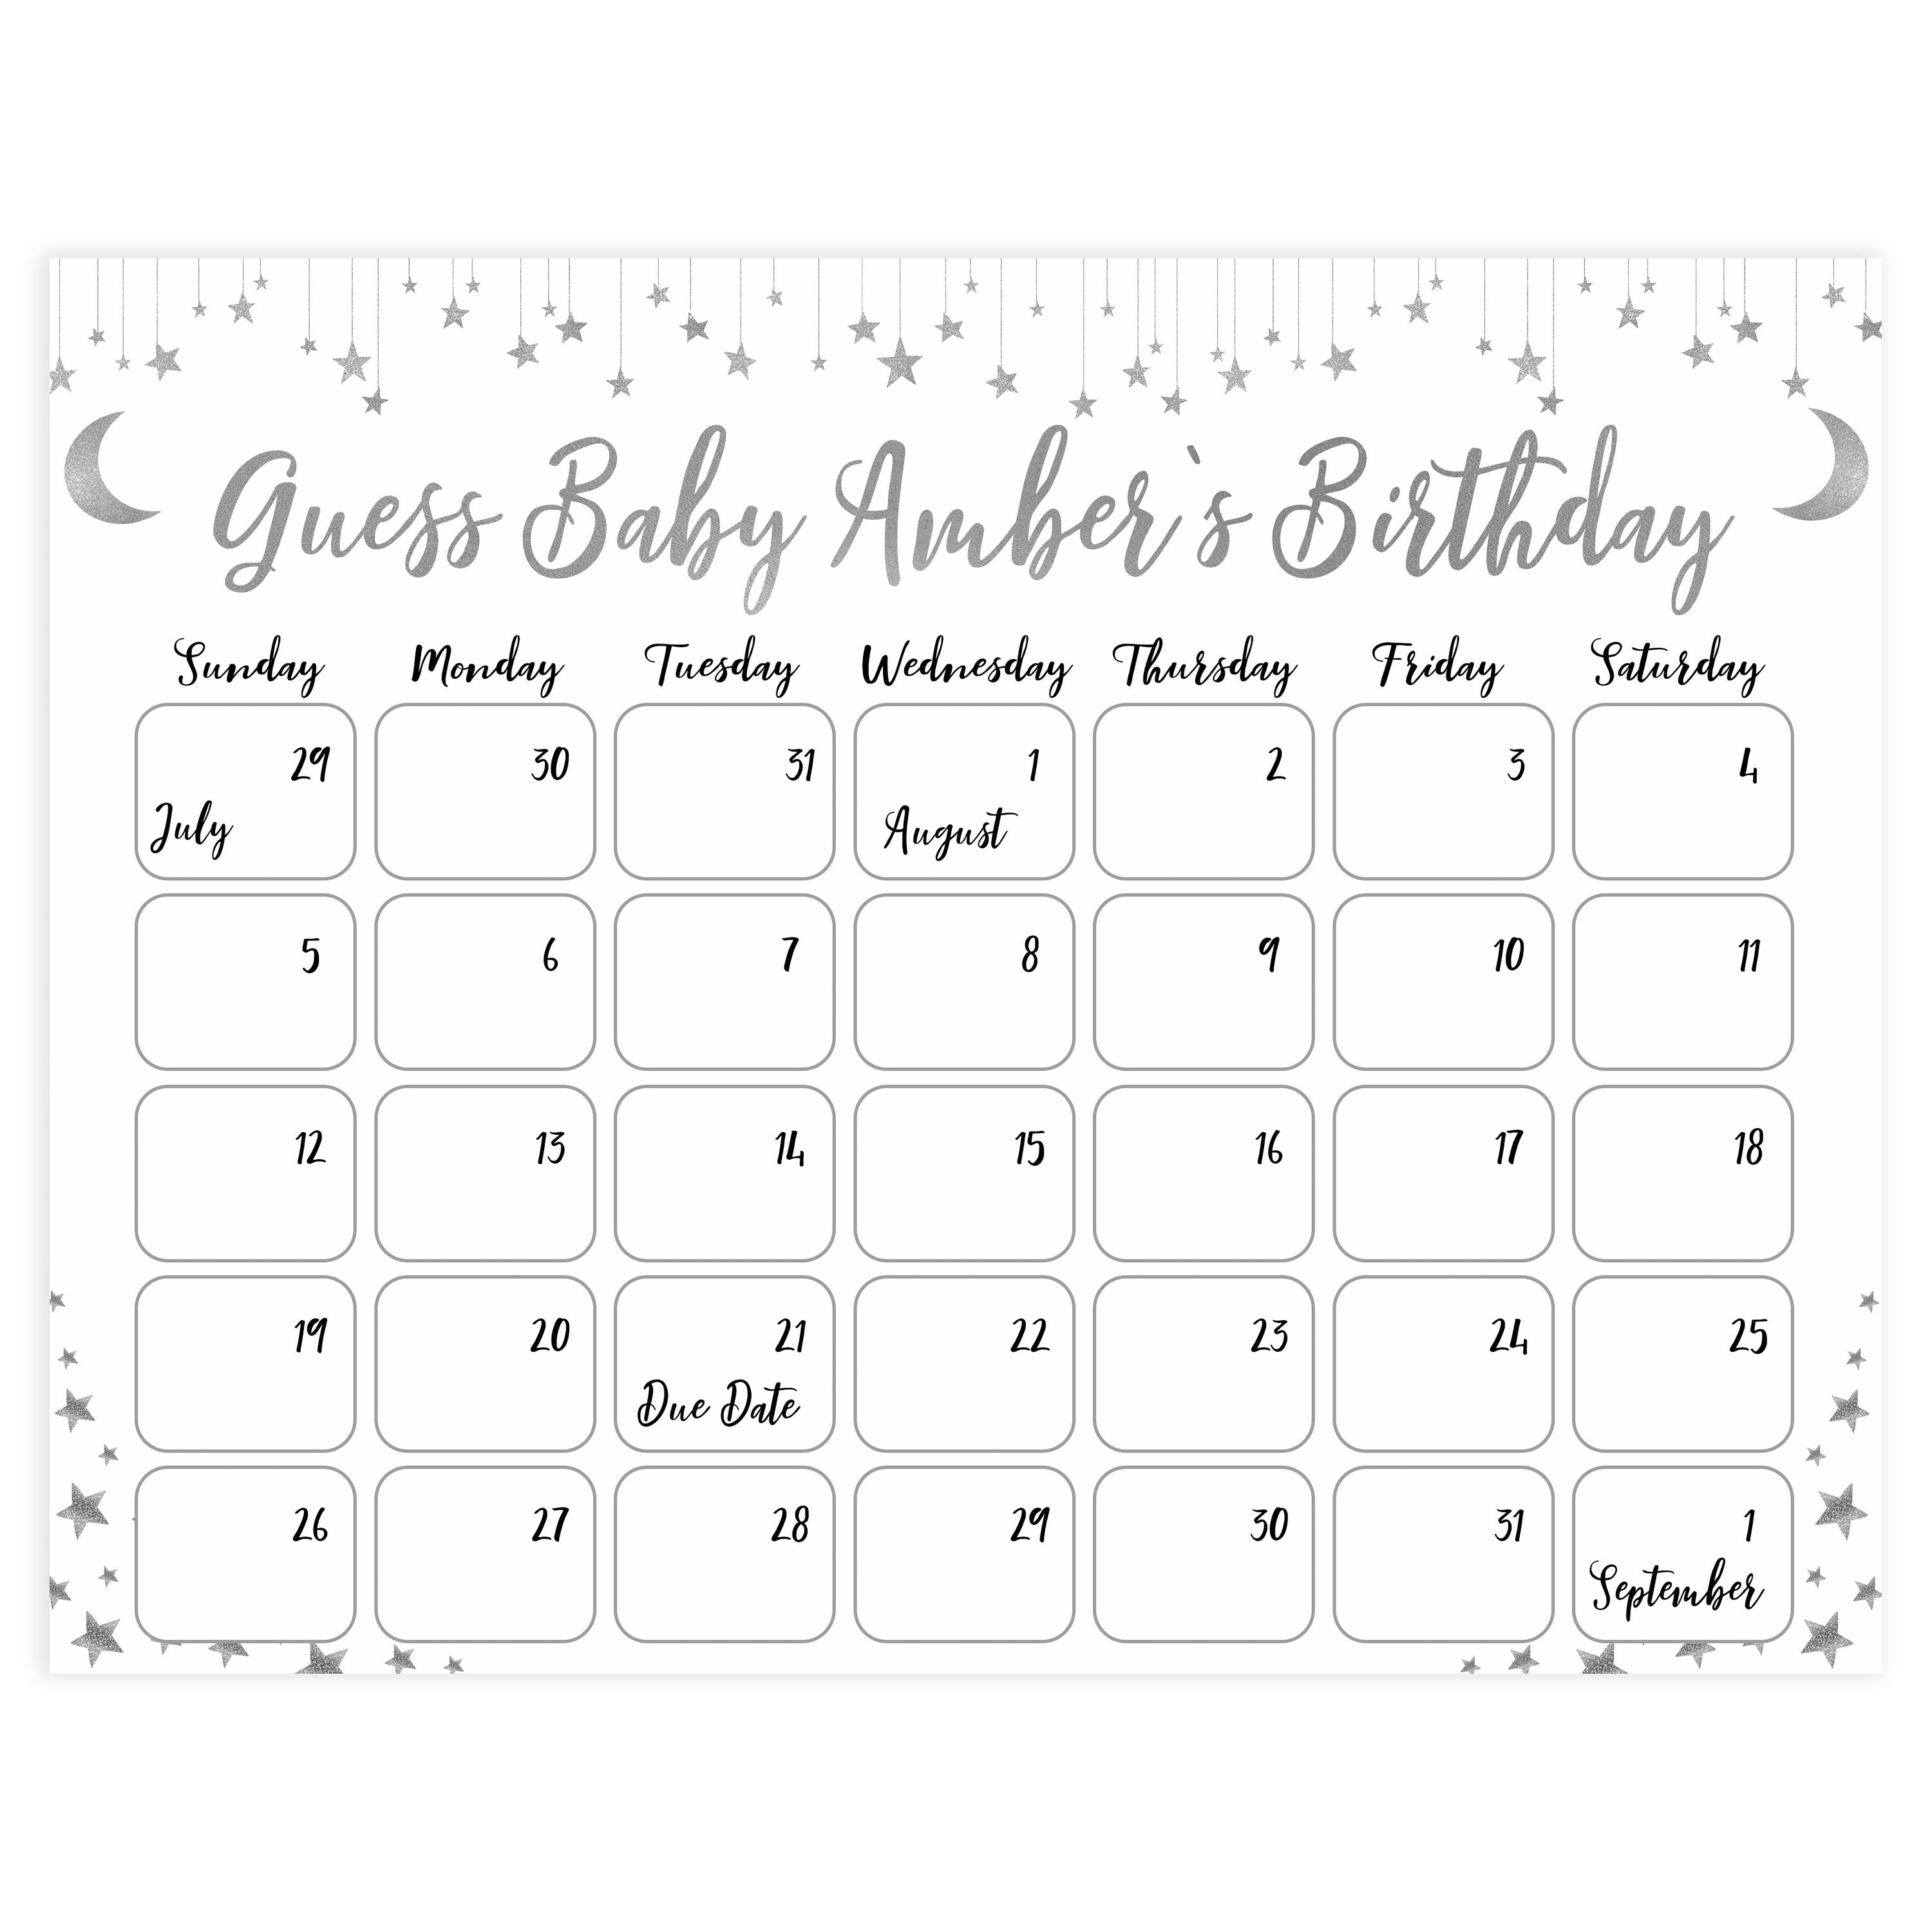 silver little star guess the baby birthday game, baby birthday predictions game, printable baby games, fun baby shower games, little star baby games